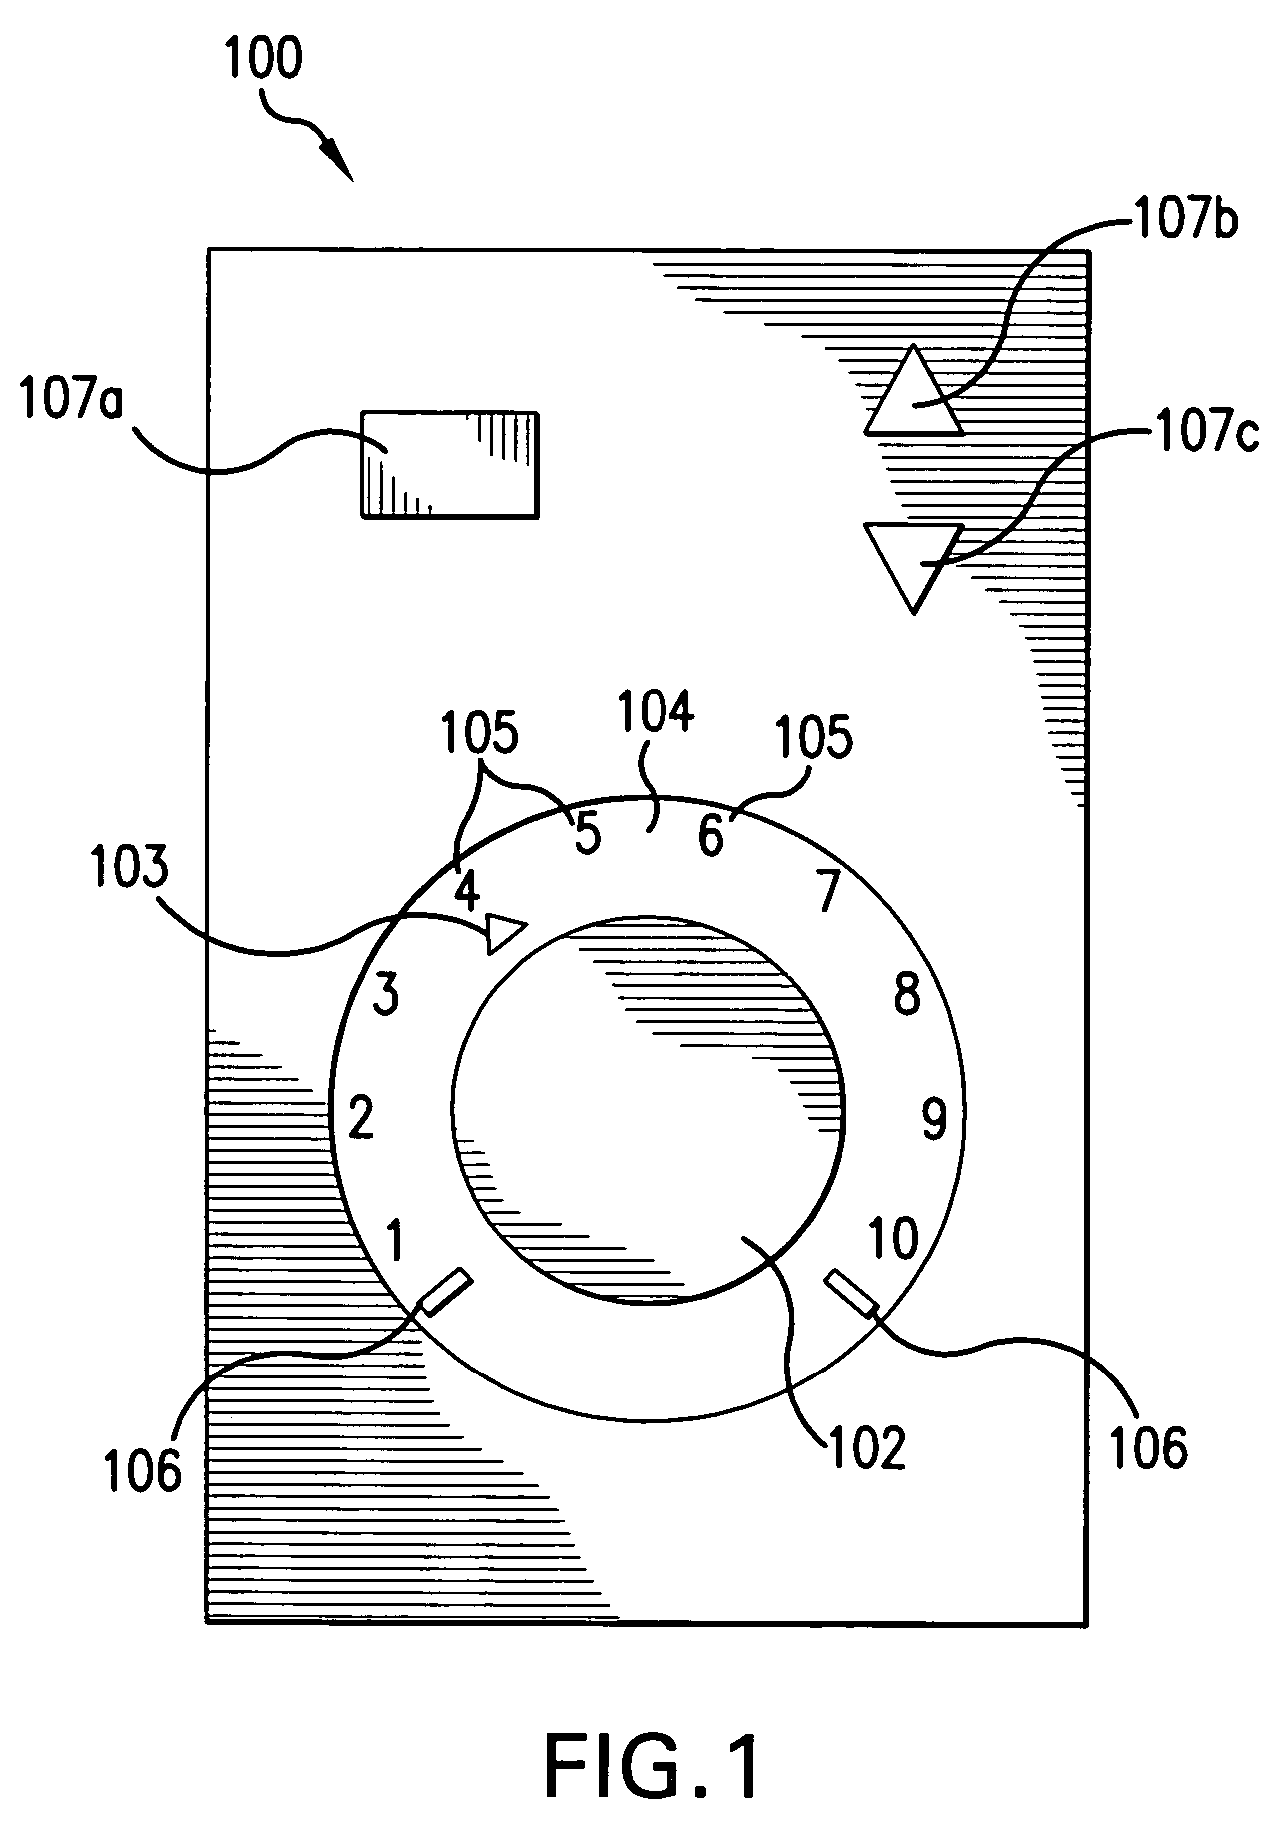 Systems and methods for providing a haptic device